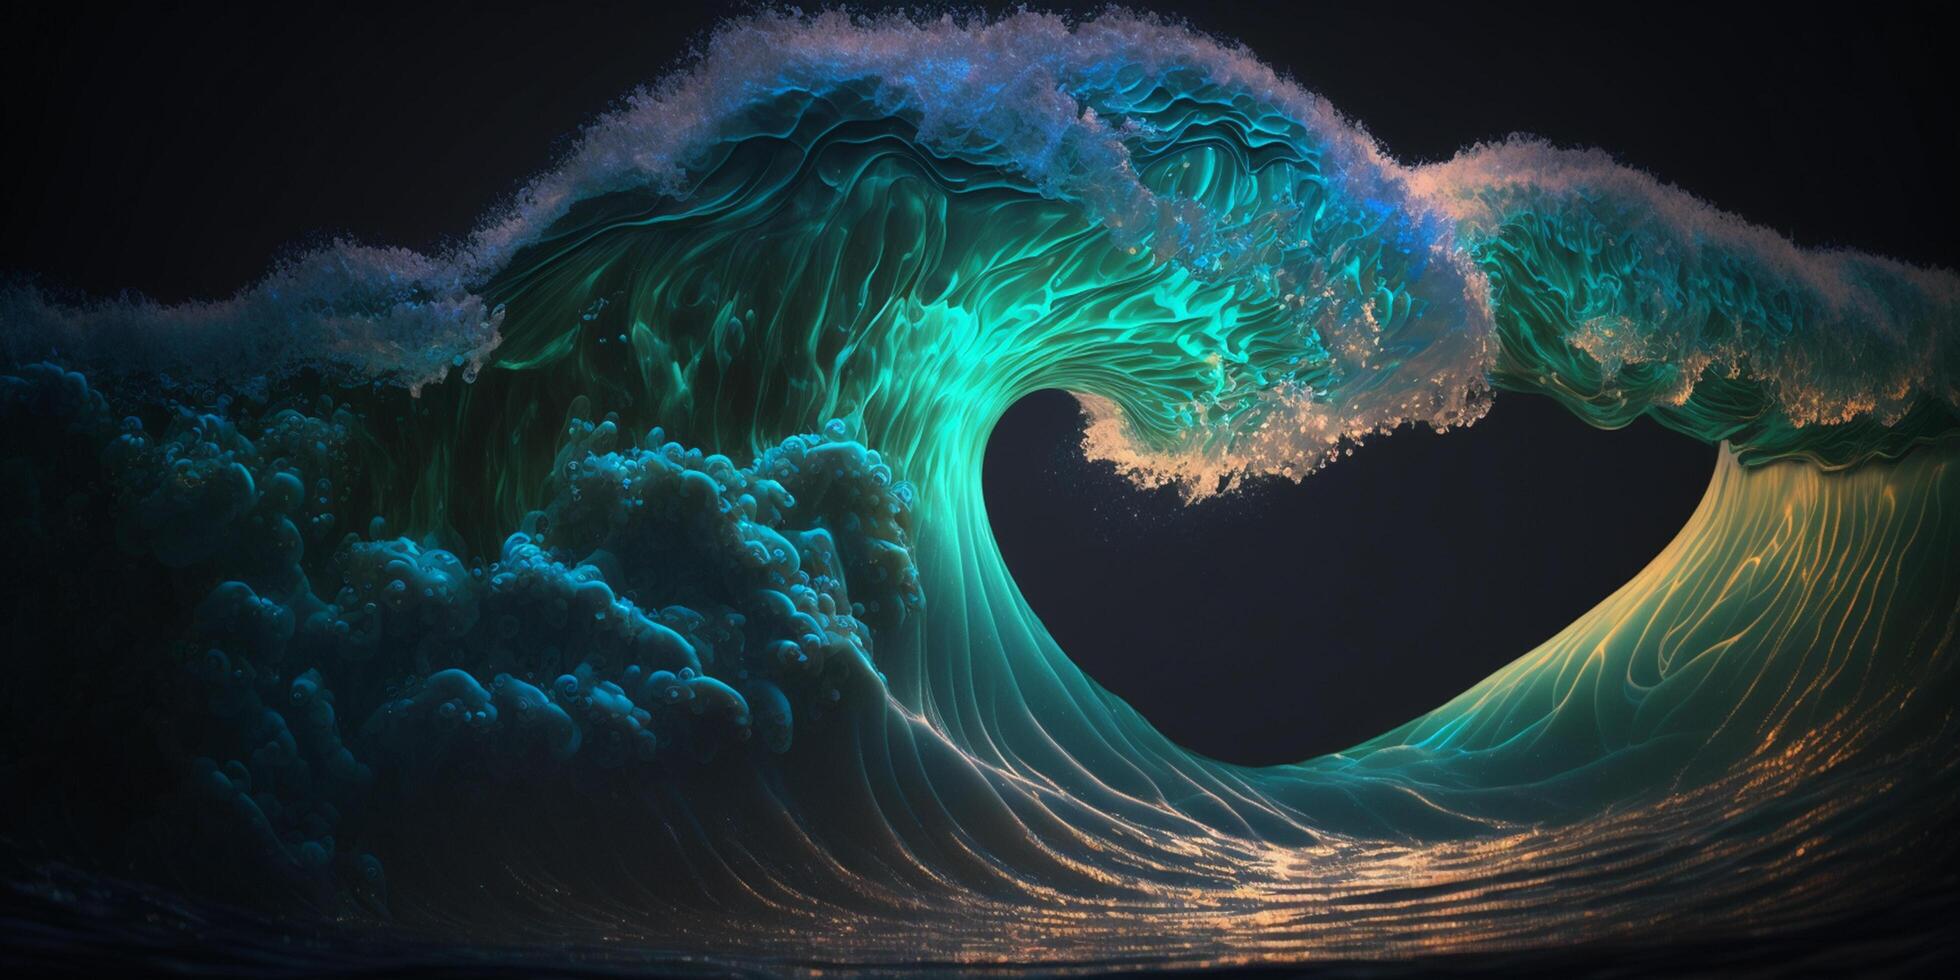 Colorful waves in the ocean in Japanese photorealistic style illustration photo